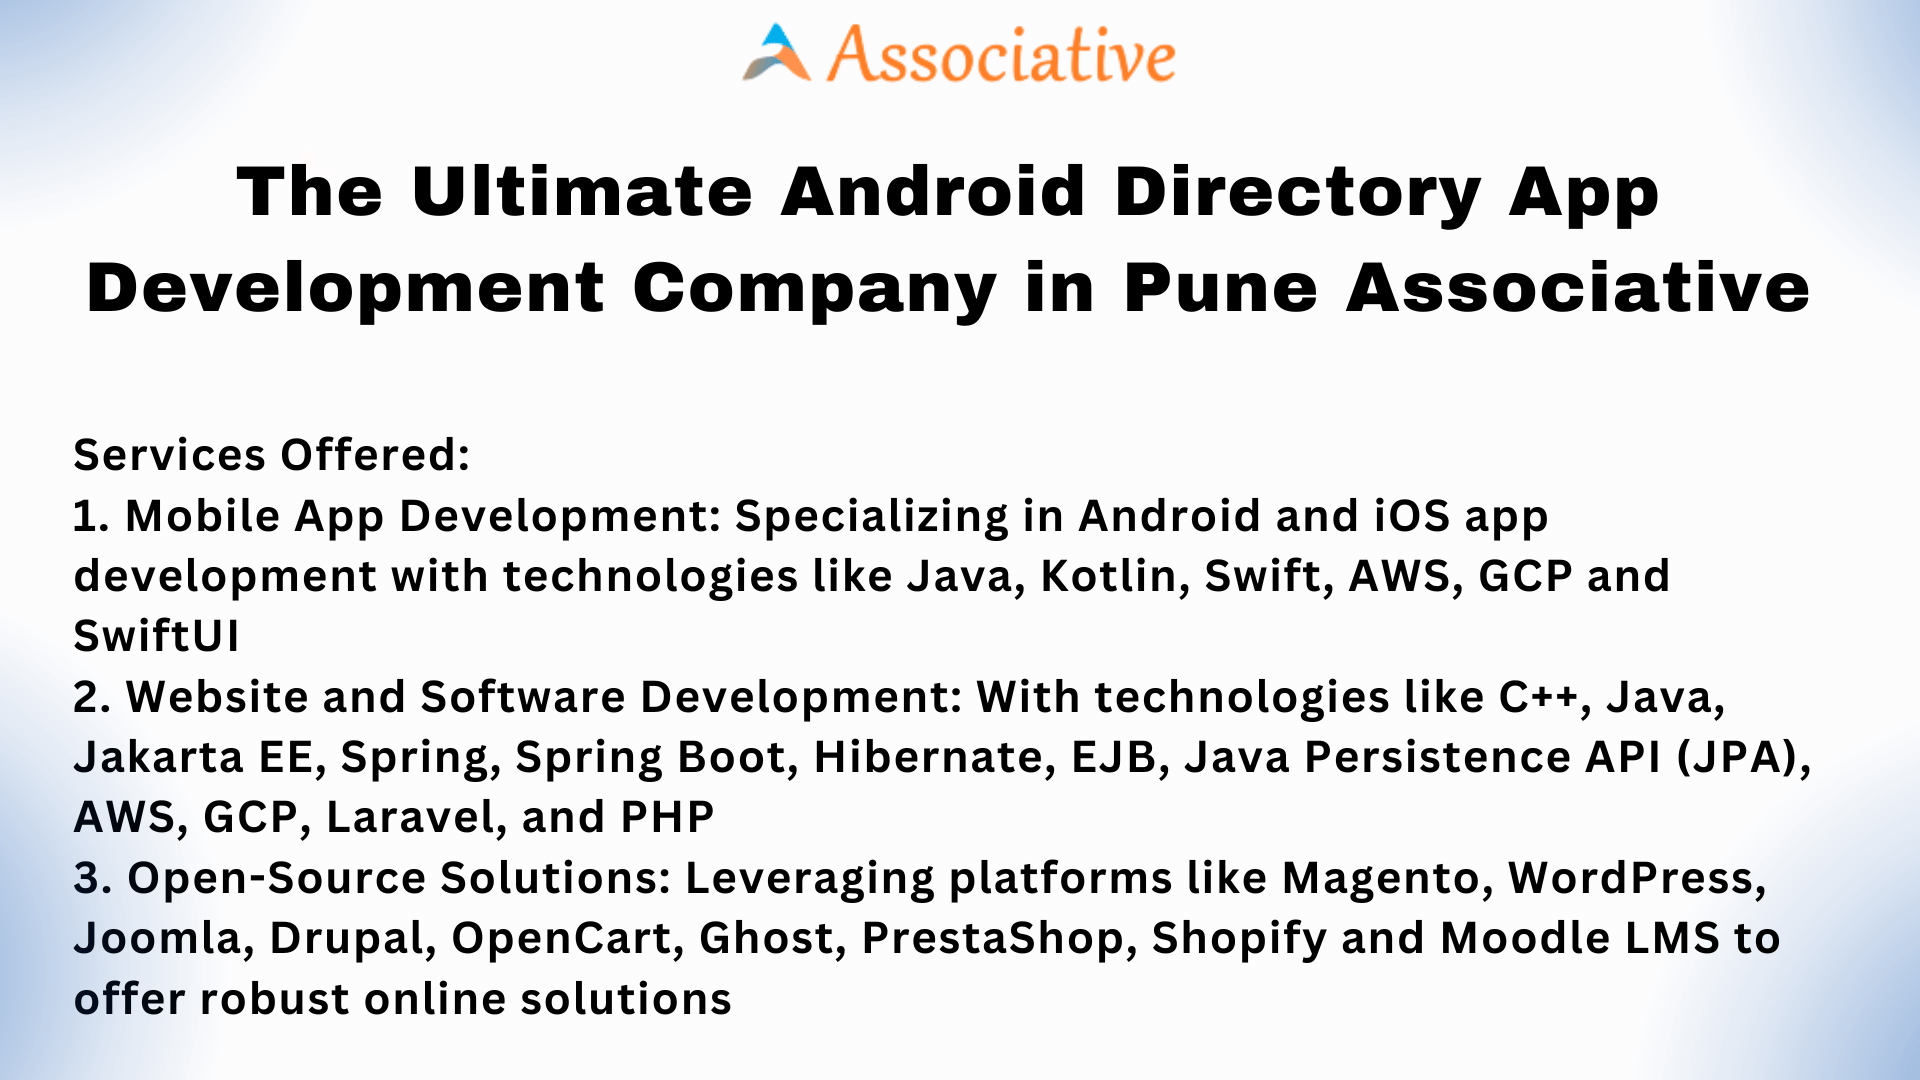 The Ultimate Android Directory App Development Company in Pune Associative